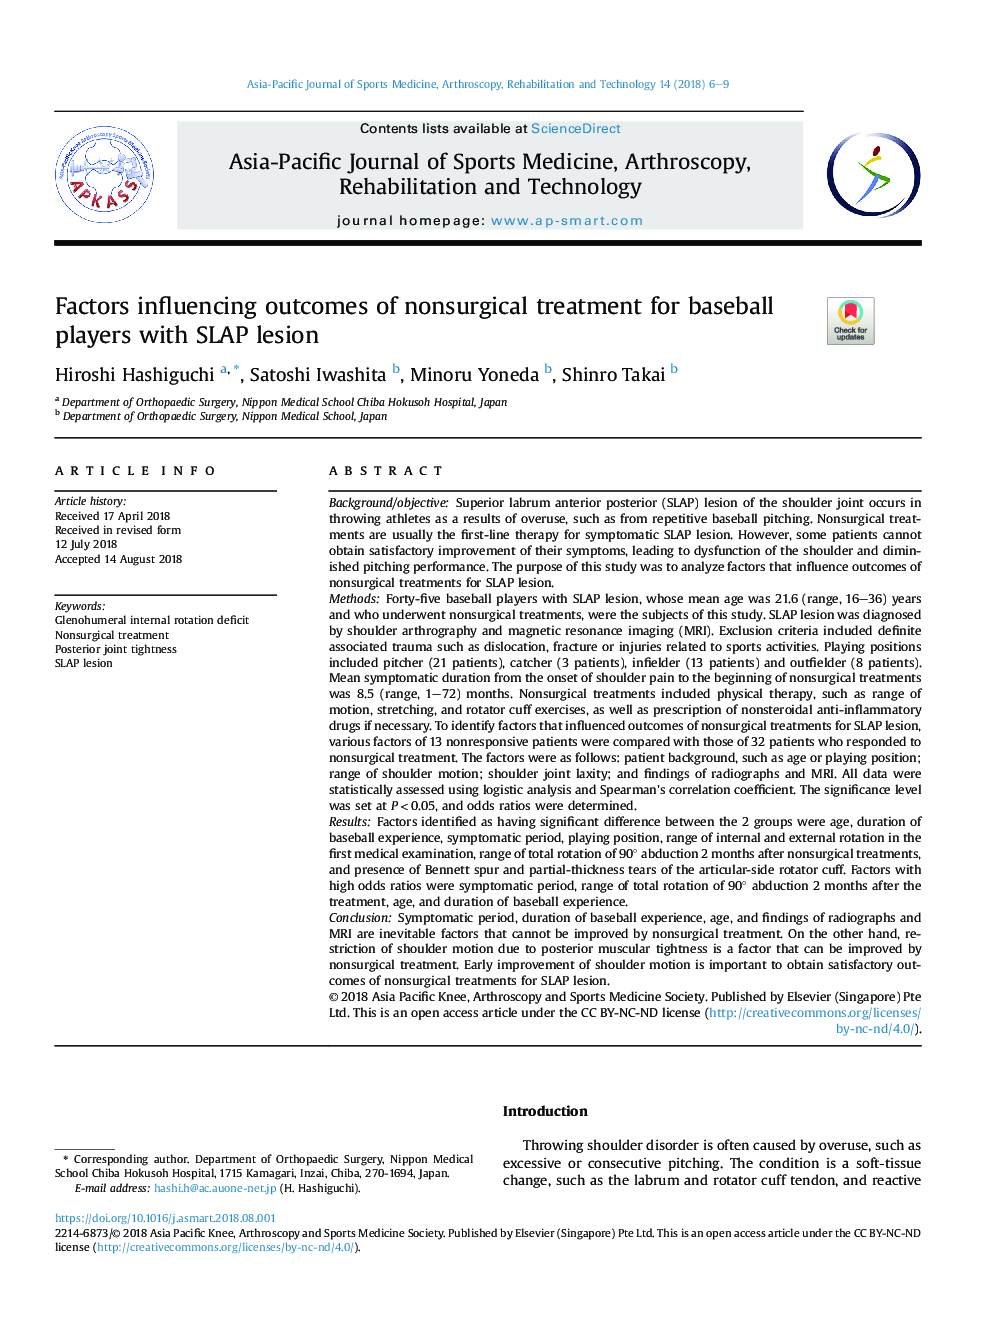 Factors influencing outcomes of nonsurgical treatment for baseball players with SLAP lesion